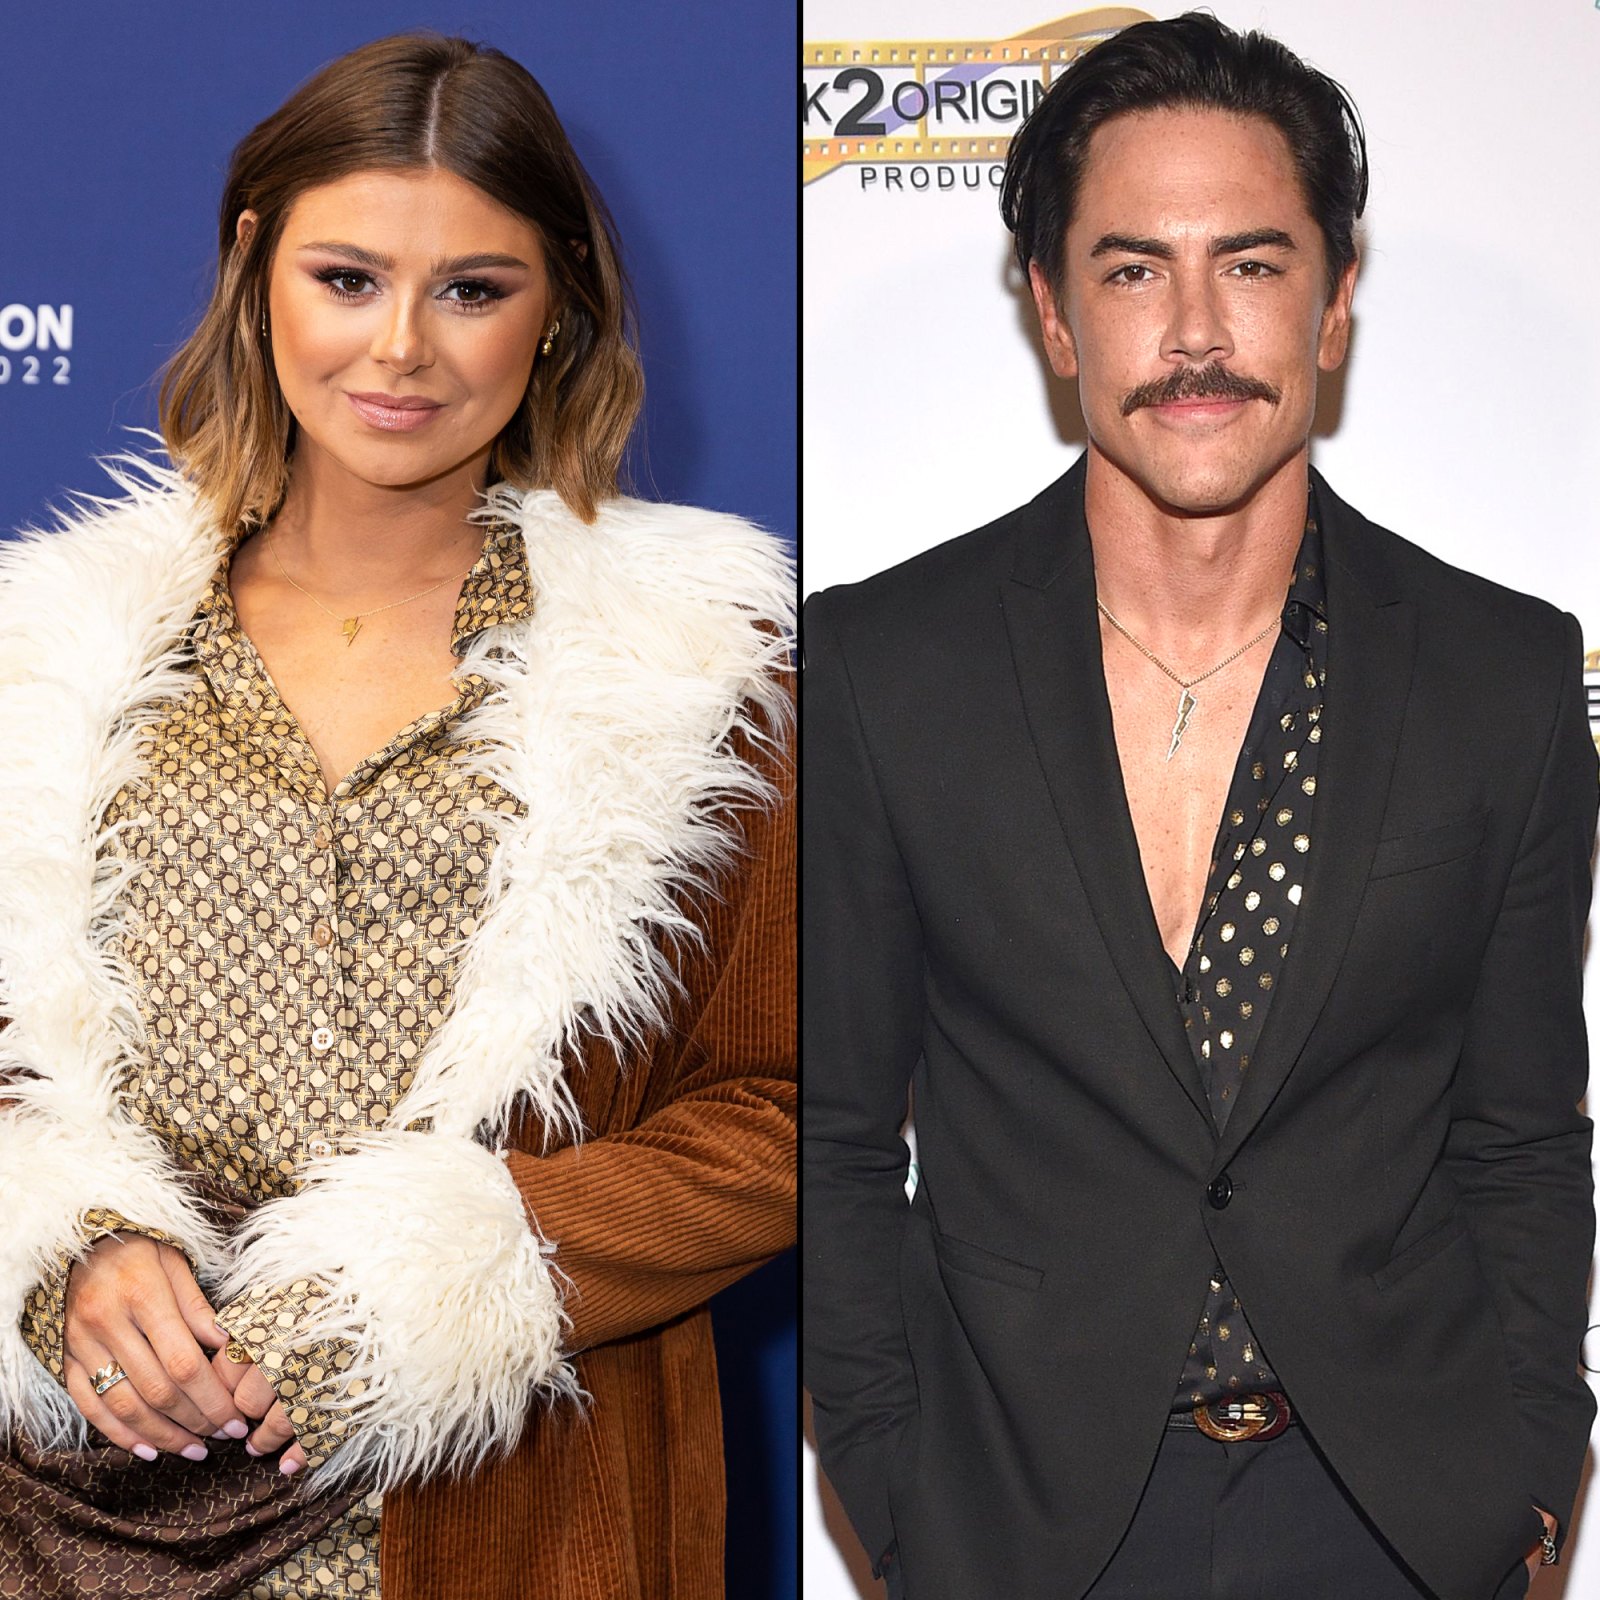 A Guide to Where Raquel Leviss and Tom Sandoval Now Stand With Each of Their 'Vanderpump Rules' Costars Amid Cheating Scandal